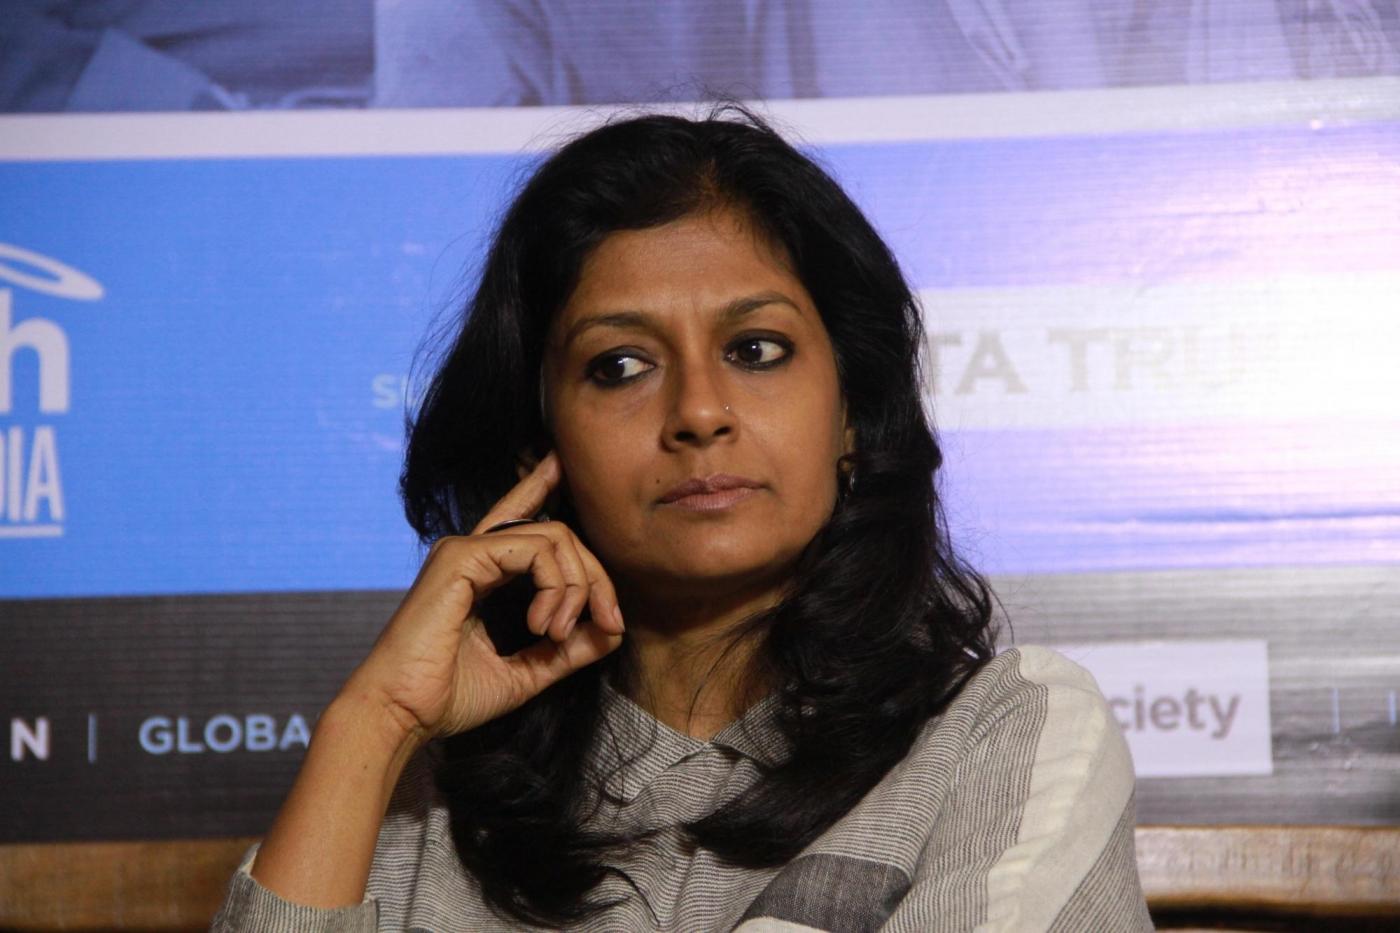 Mumbai: Actress Nandita Das during a press announcement for 'Films For Change' initiative organised by Good Pitch India in Mumbai on March 14, 2018. (Photo: IANS) by .